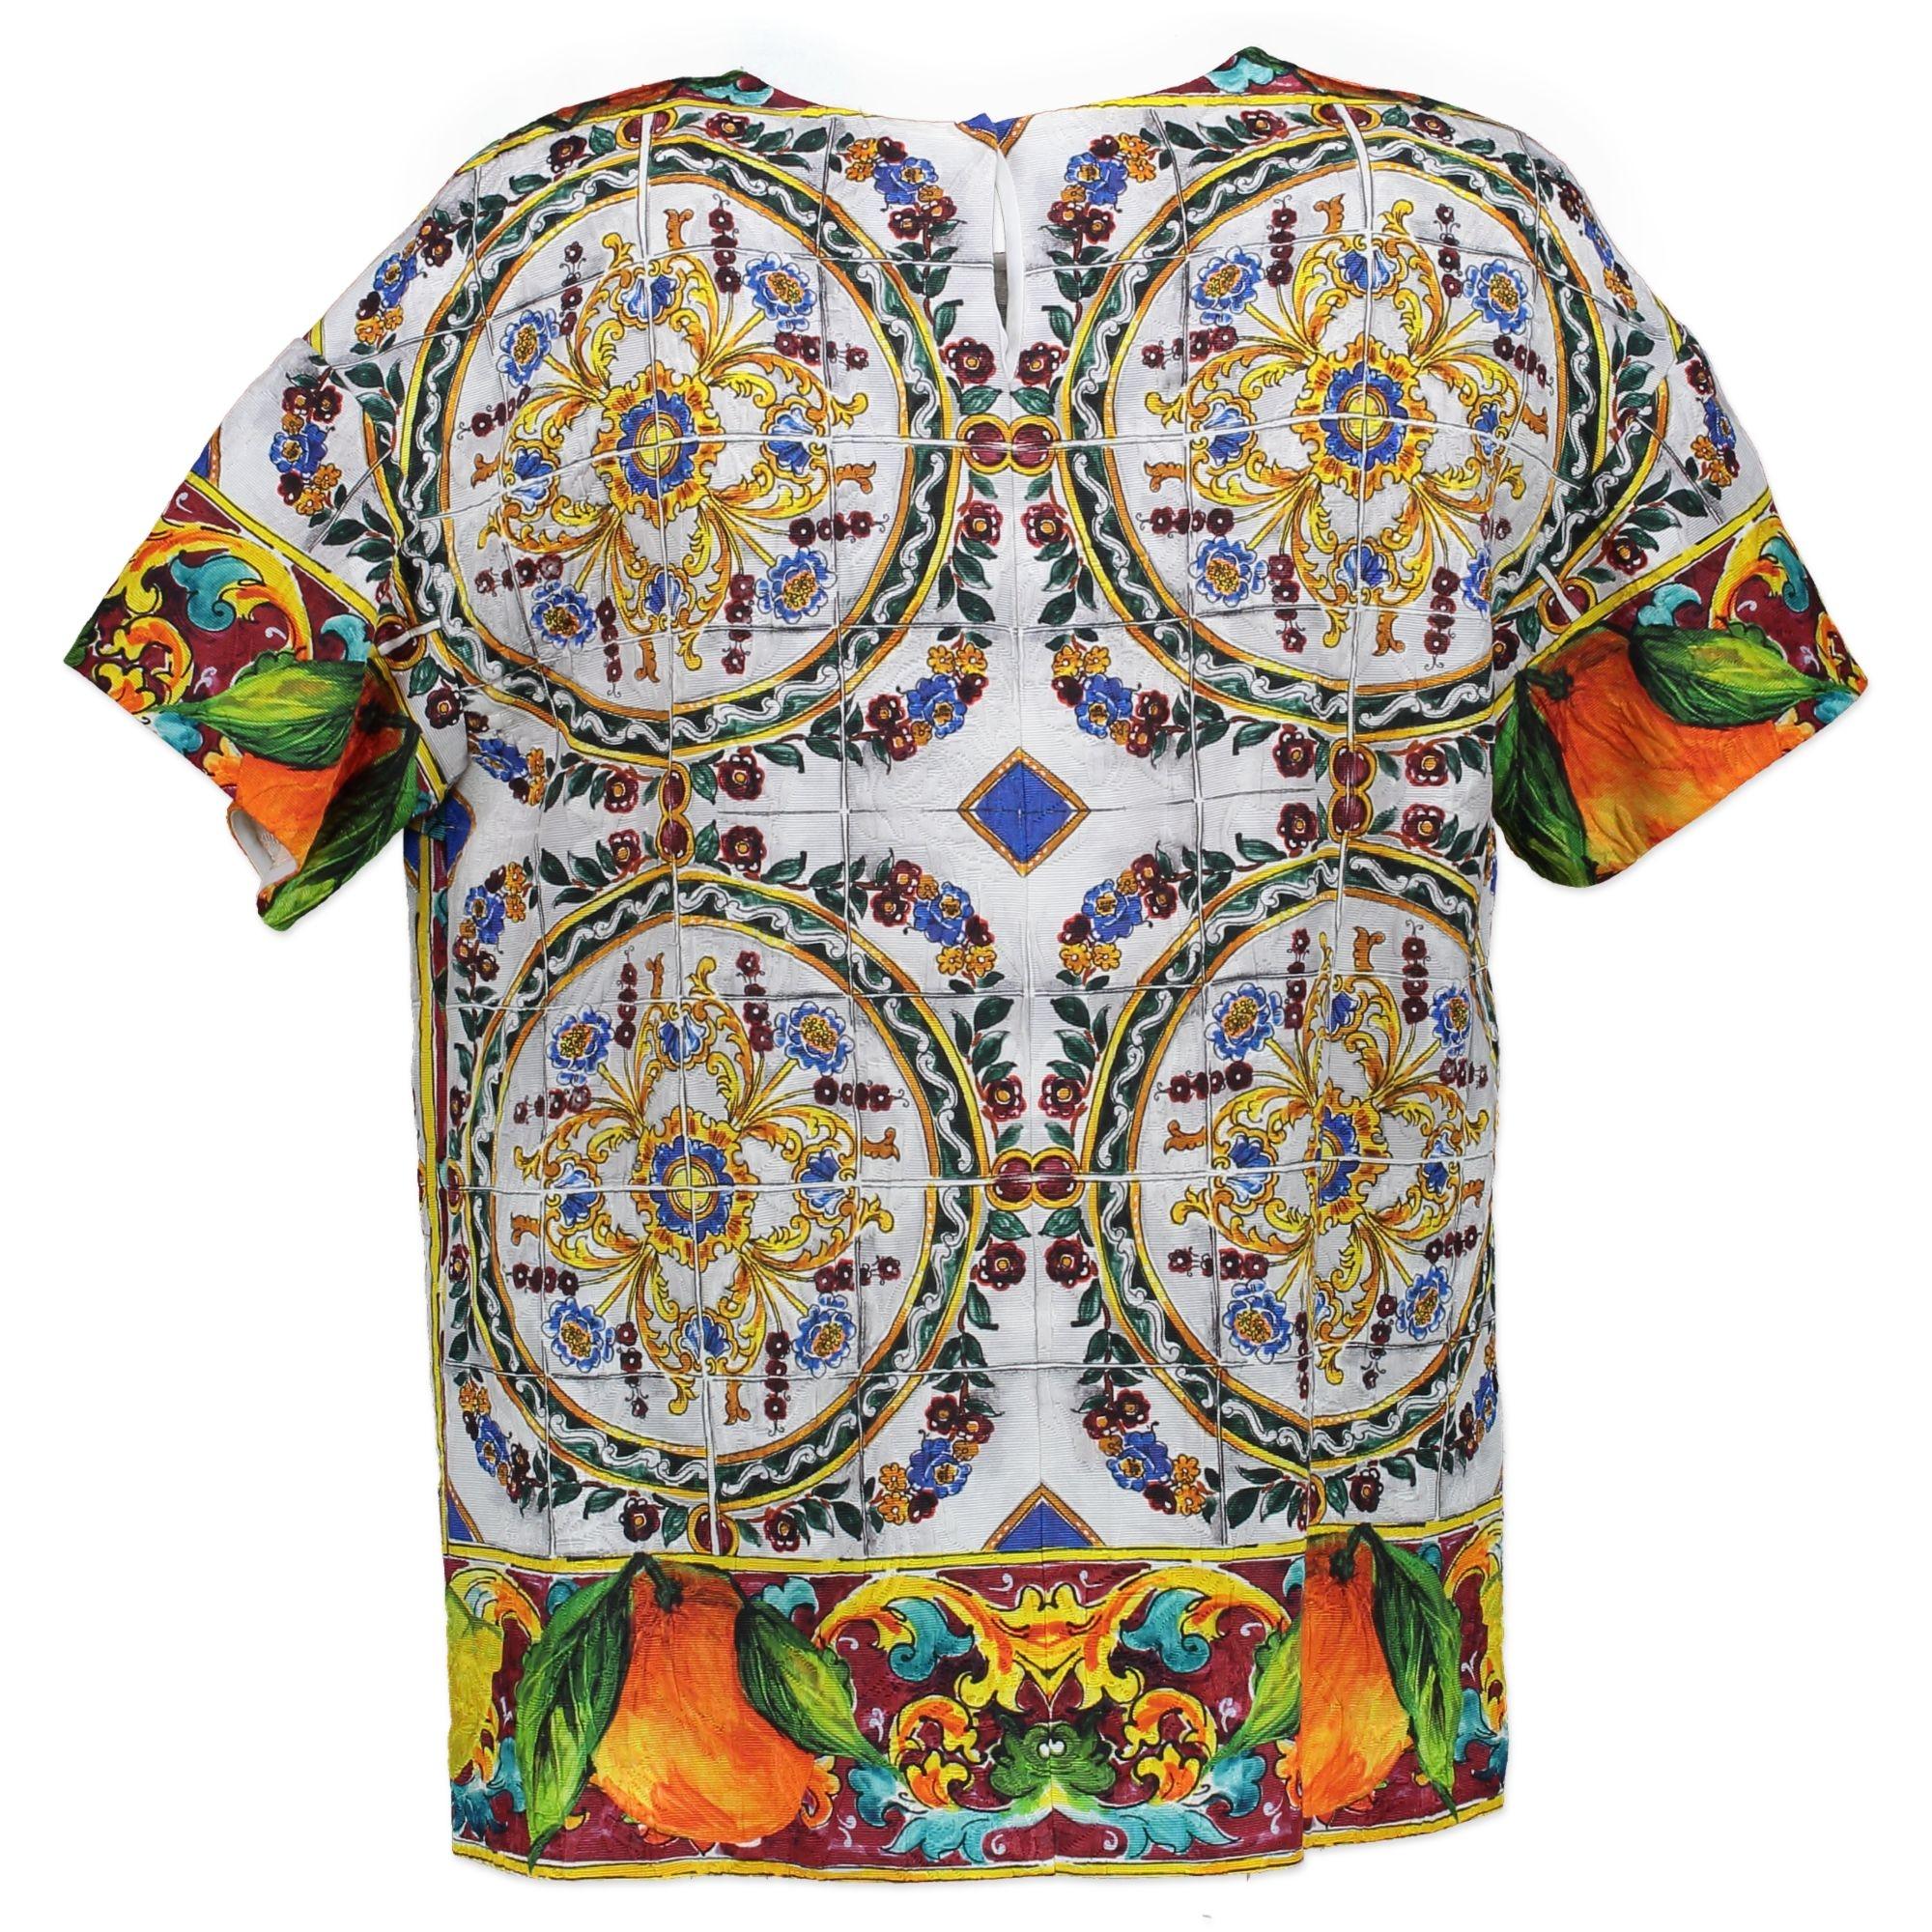 Excellent condition

Dolce & Gabbana Short Sleeve Multicolor Blouse - SIZE IT40

If you're looking for the perfect top to stand out, look no further! This Dolce & Gabbana edition features a vintage-looking floral/abstract-print and amazing colors.